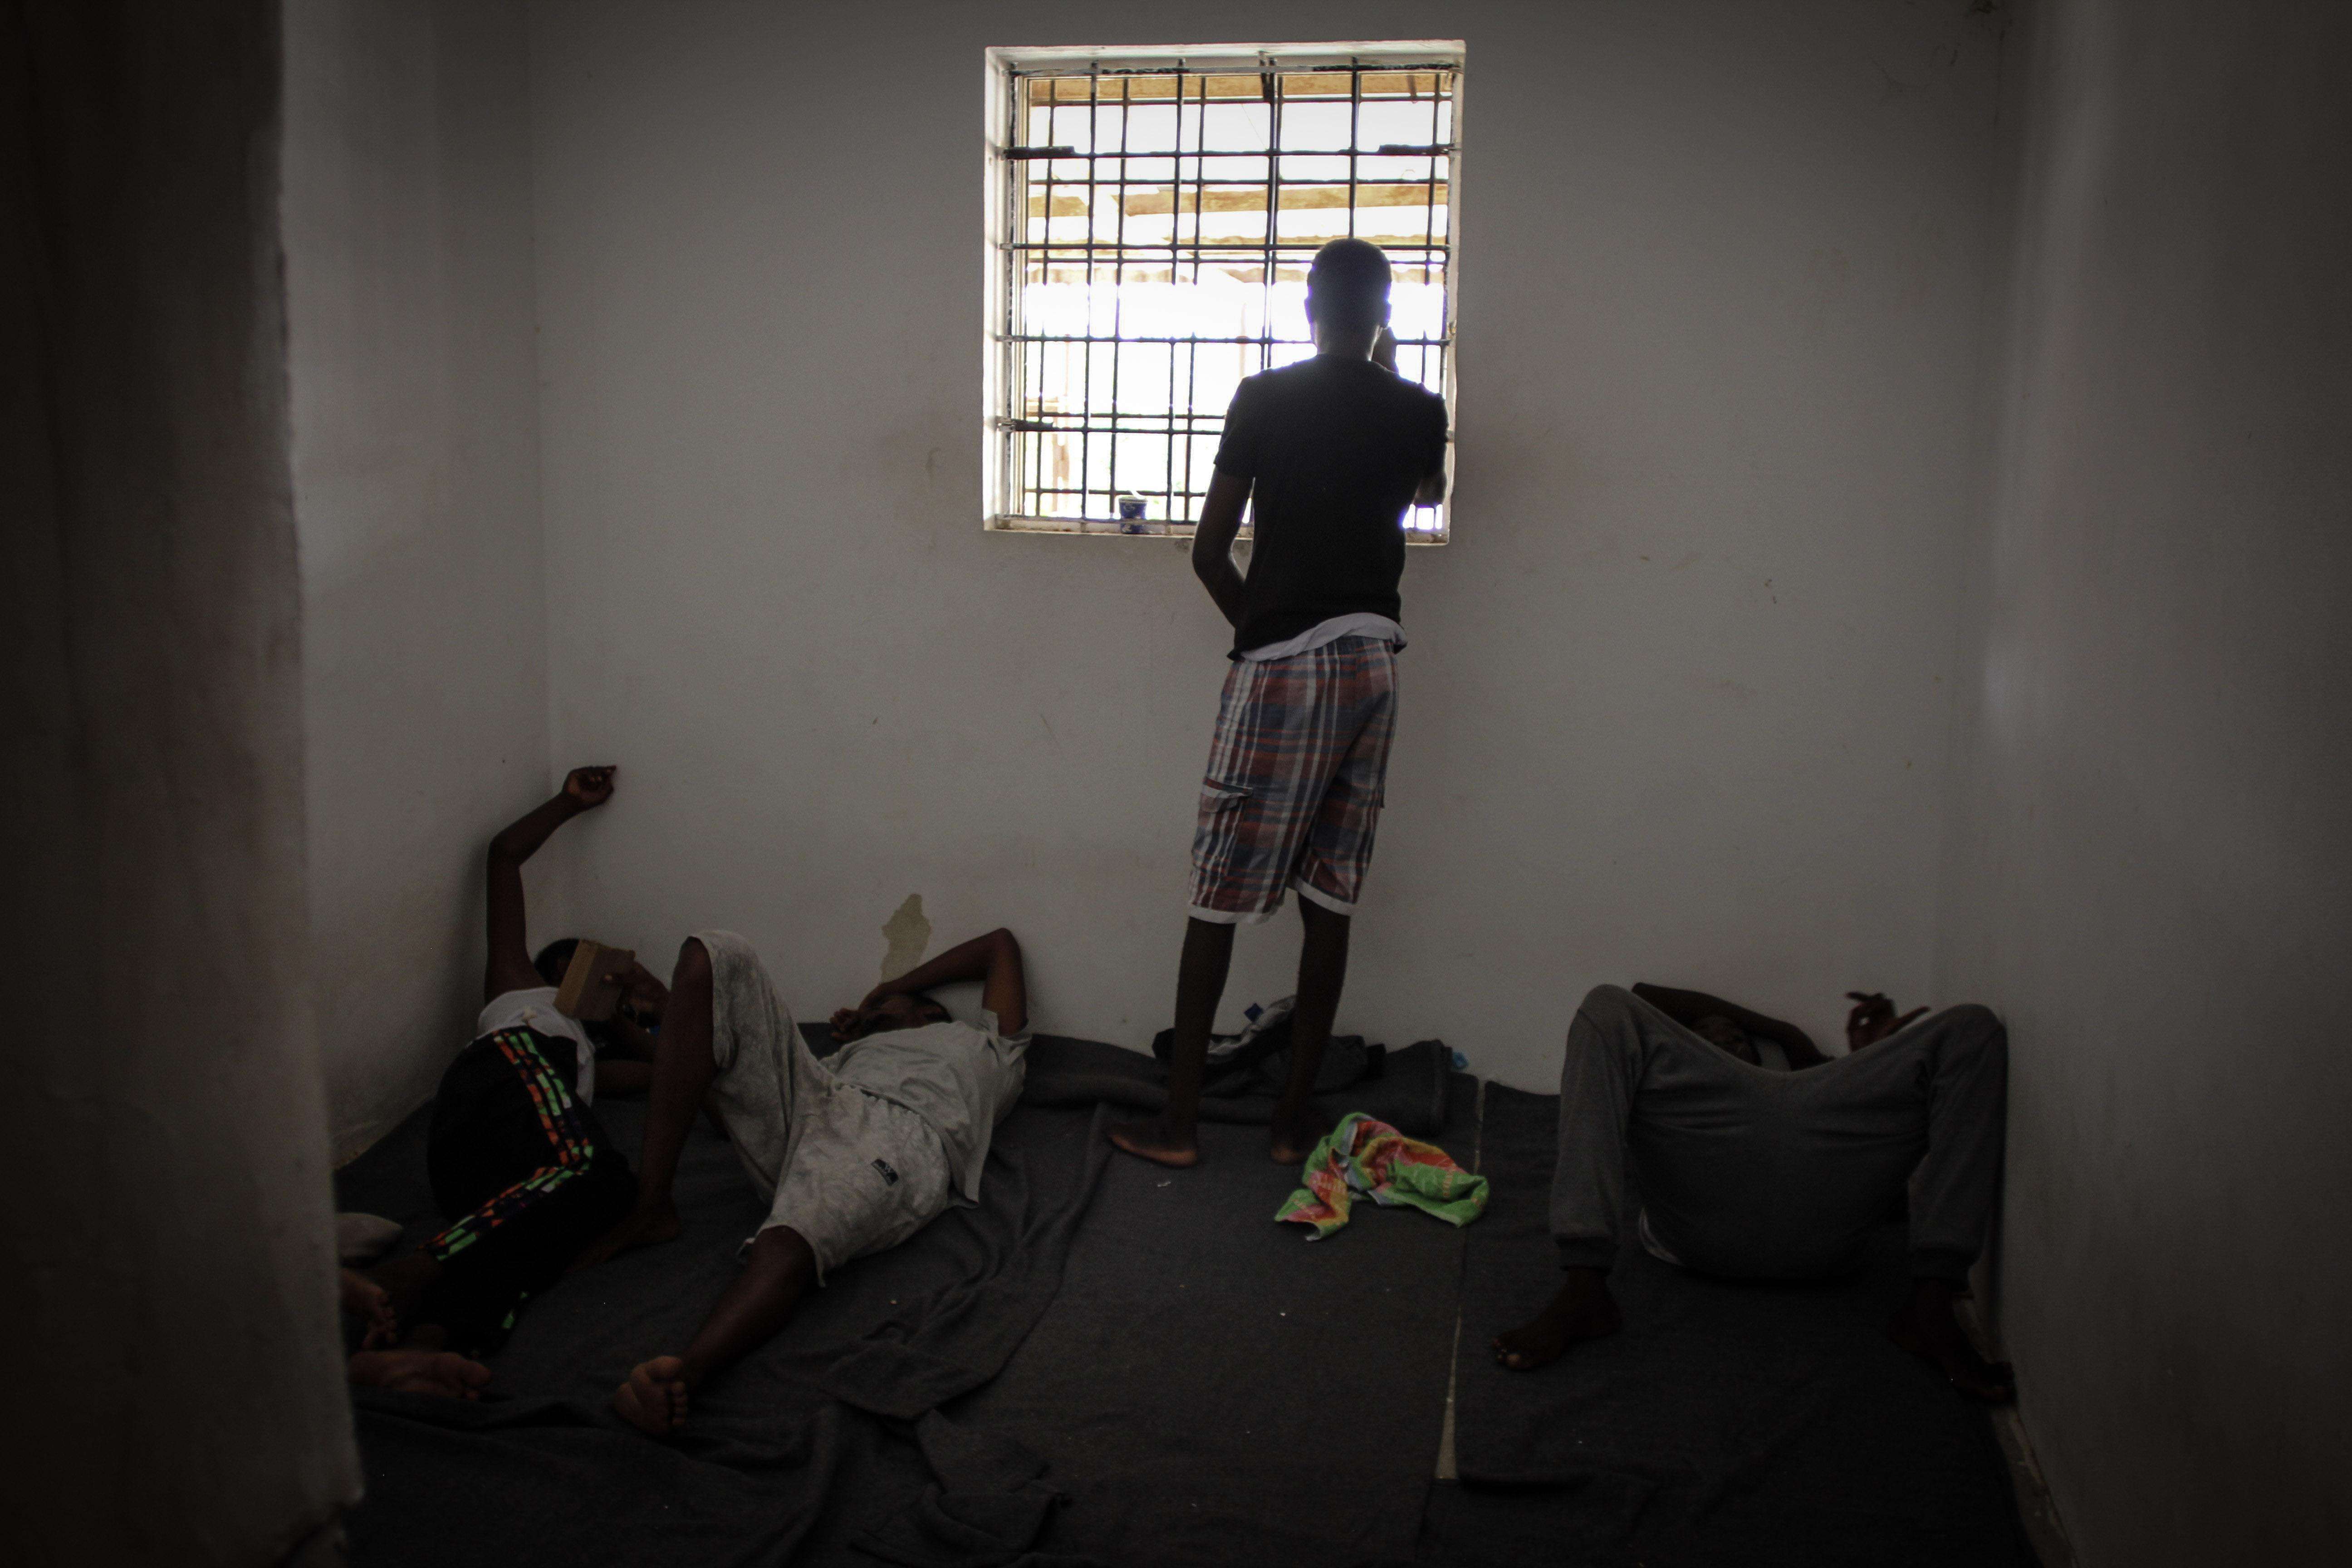 Migrants are held in a Libyan detention center. Photo taken in 2018.